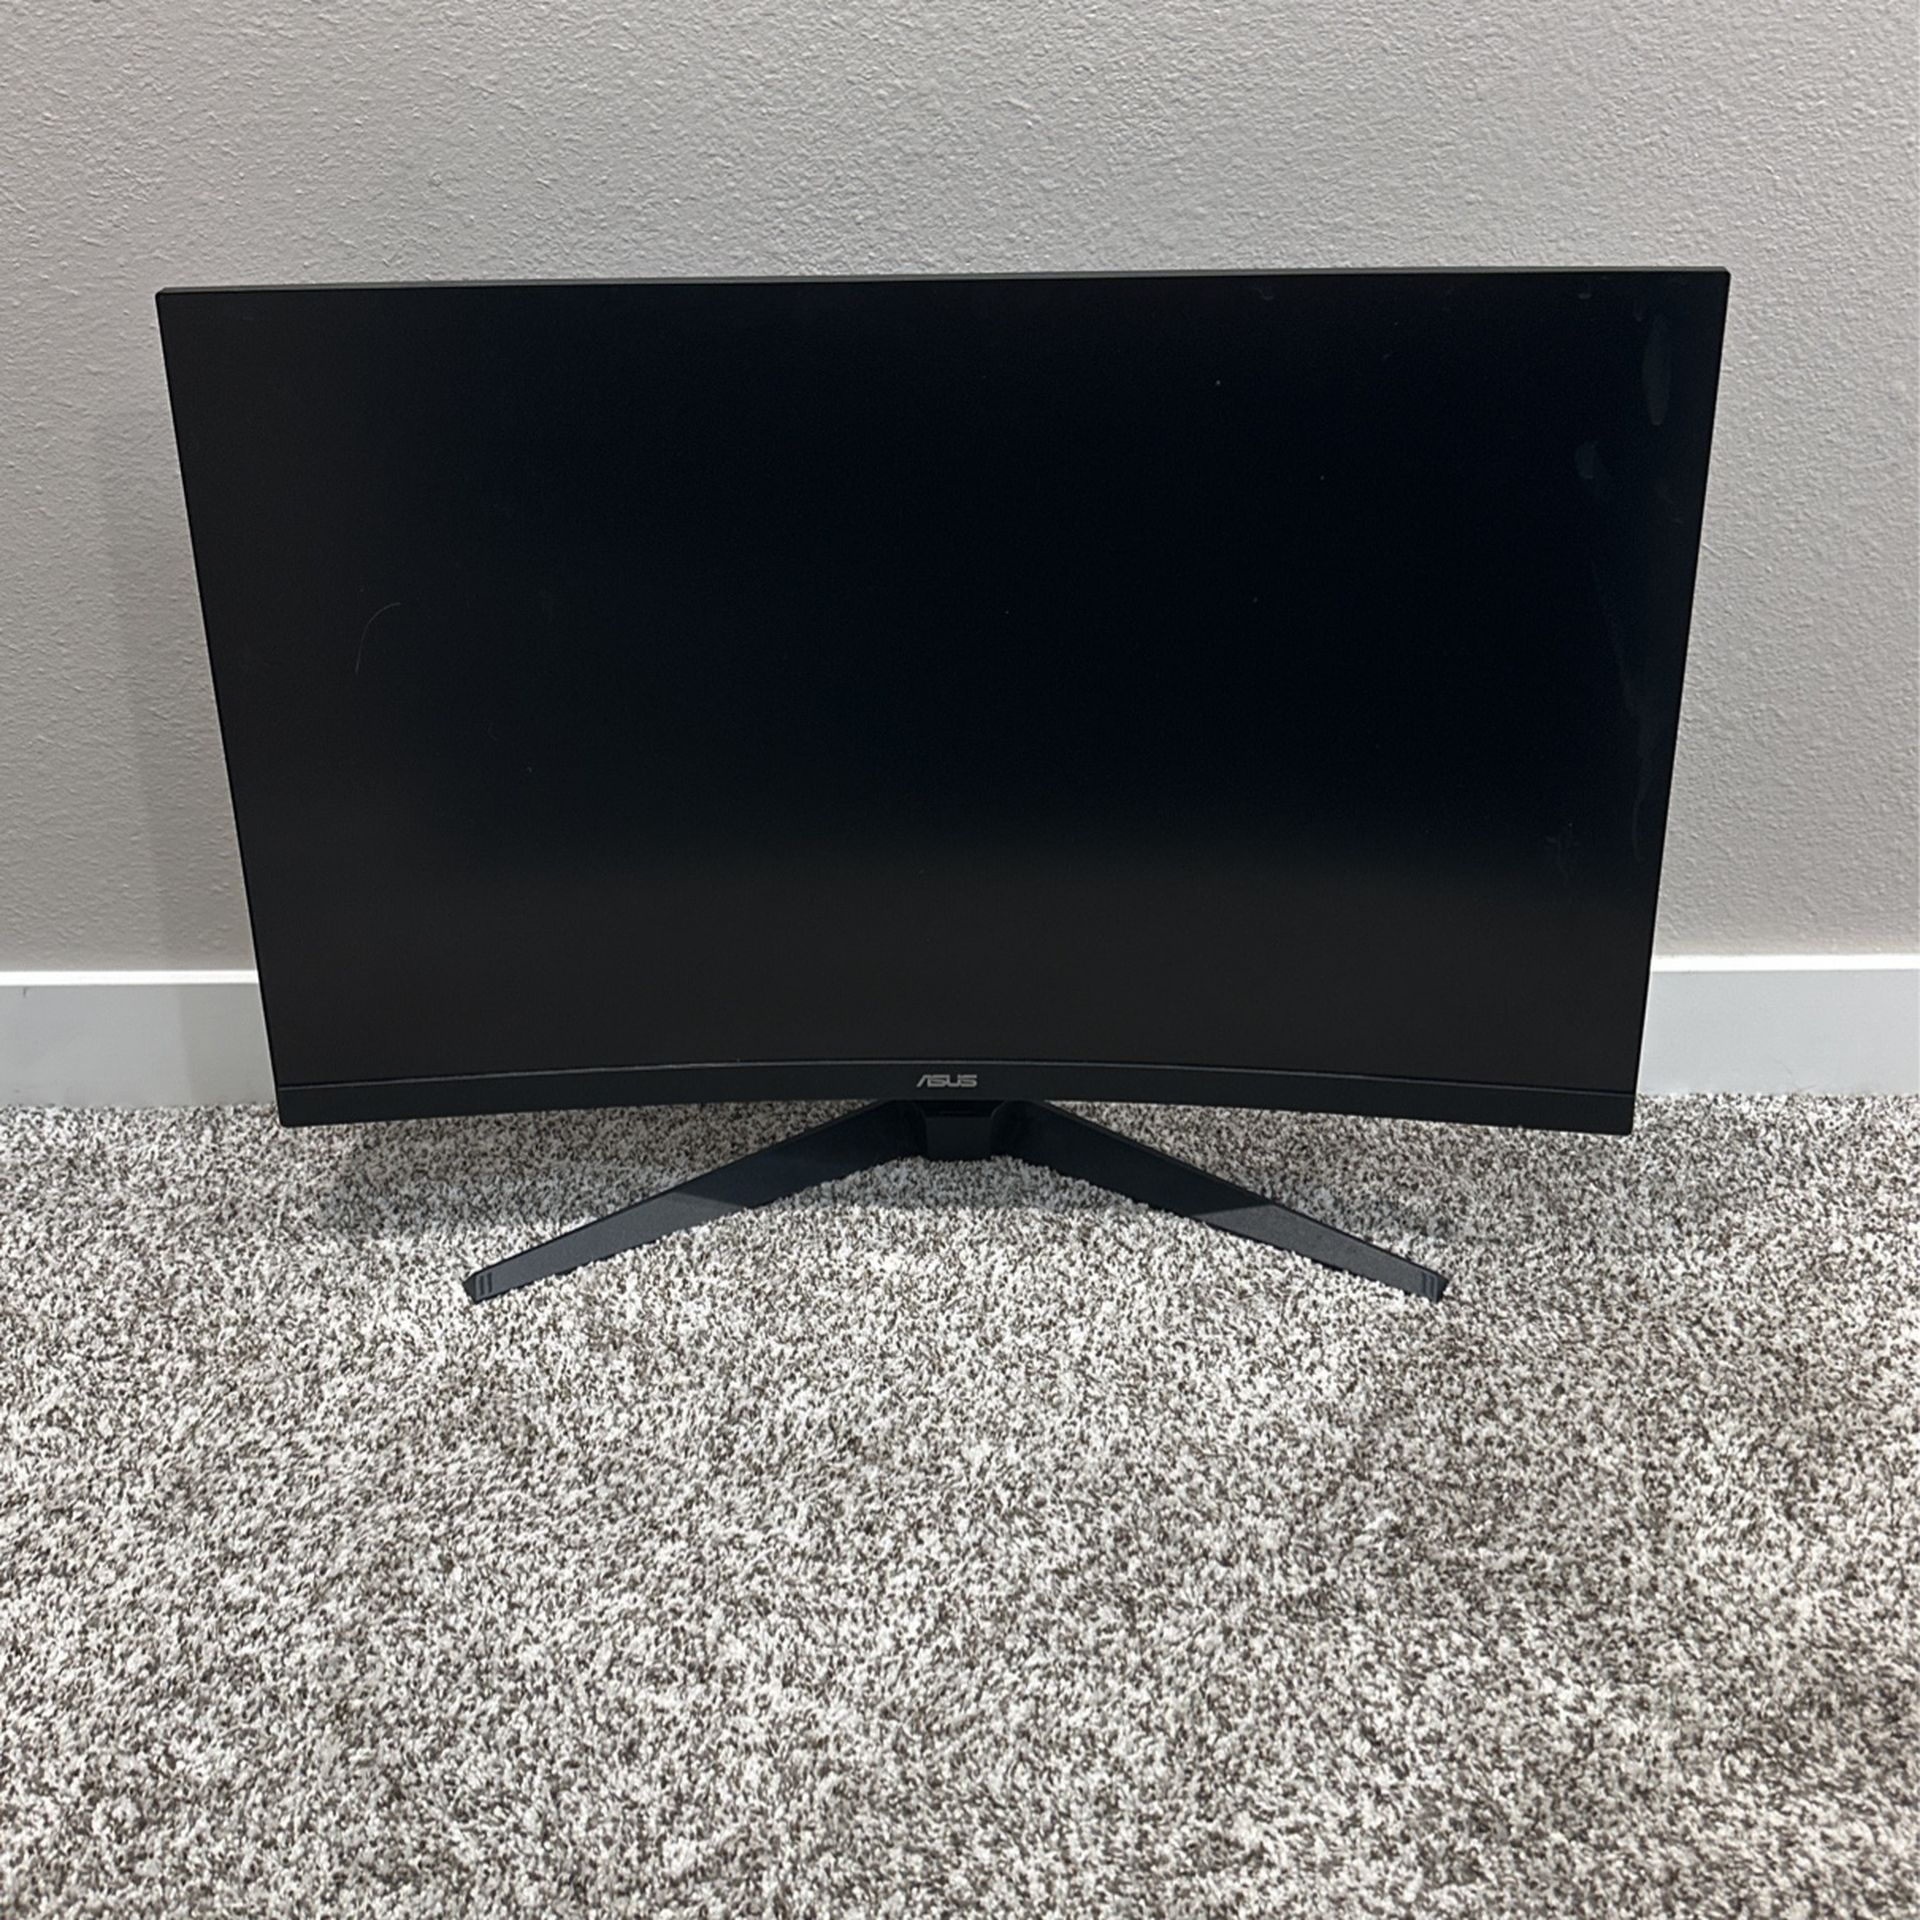 32” Curved Asus Monitor